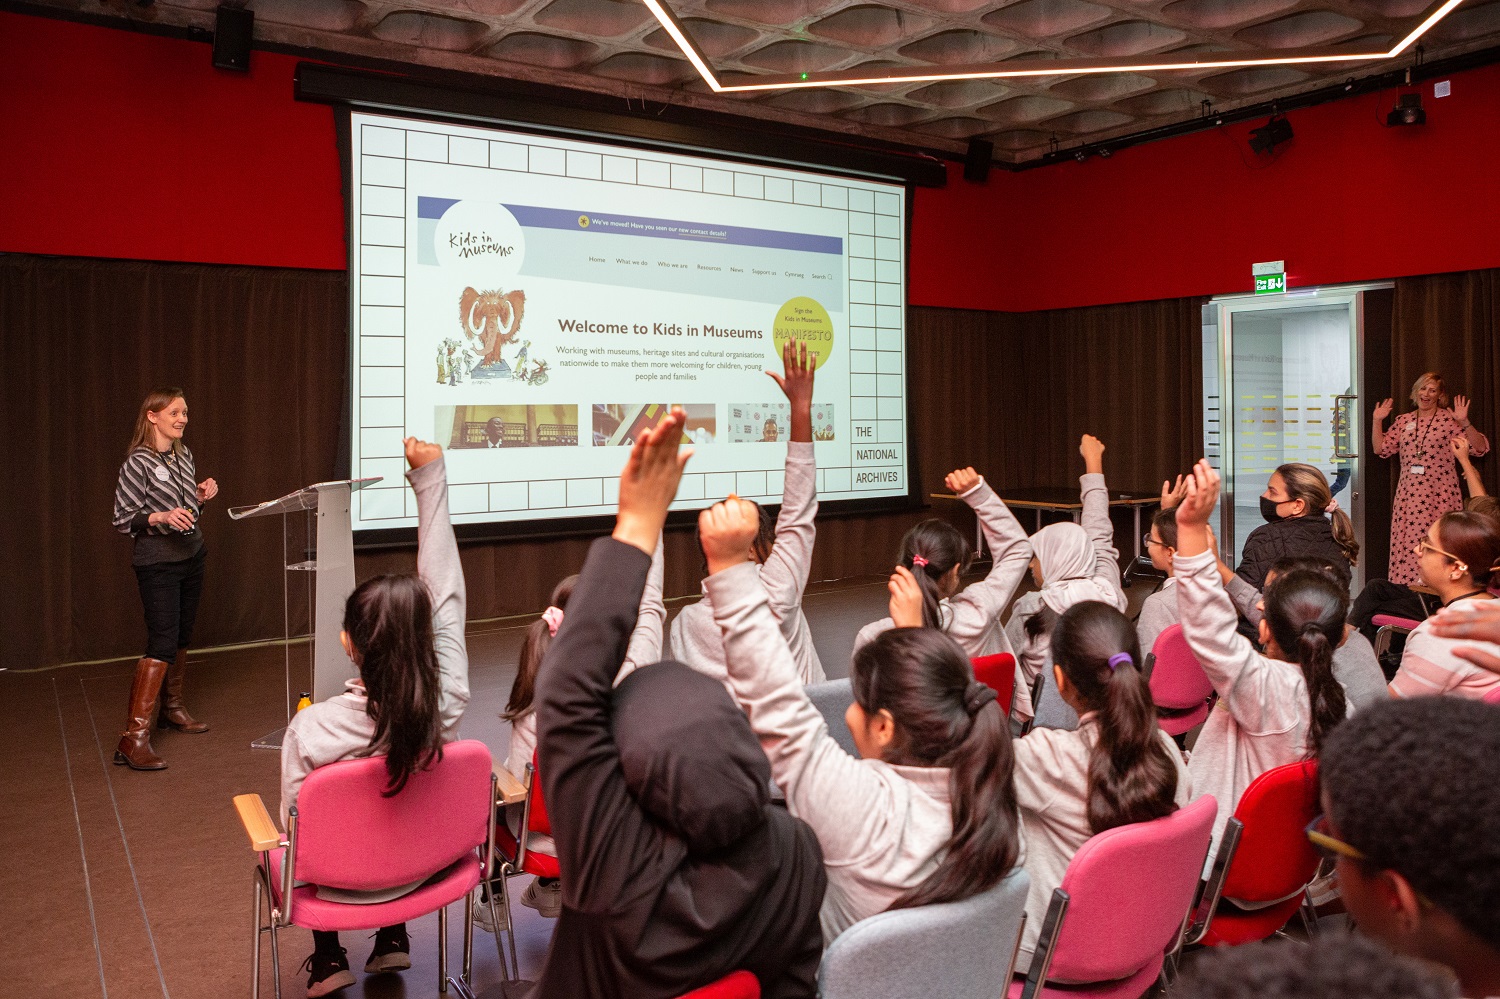 A woman stands next to a projector screen showing the Kids in Museums website in front a group of children all with their hands in the air at the national archives takeover day.